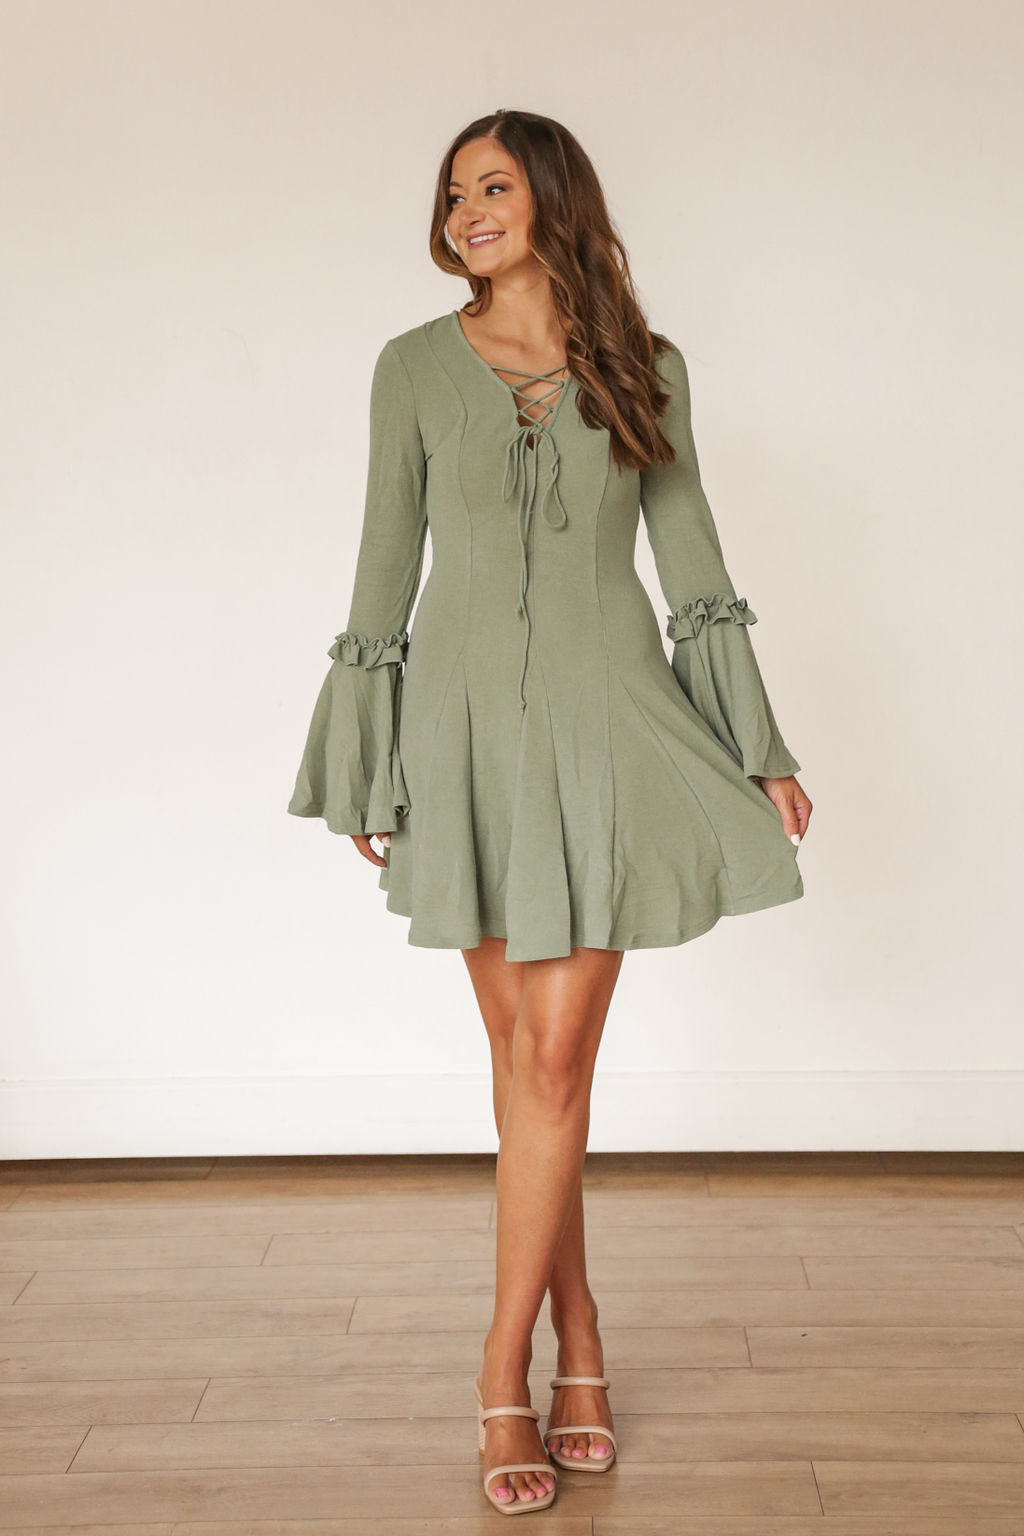 sage green dress with sleeves